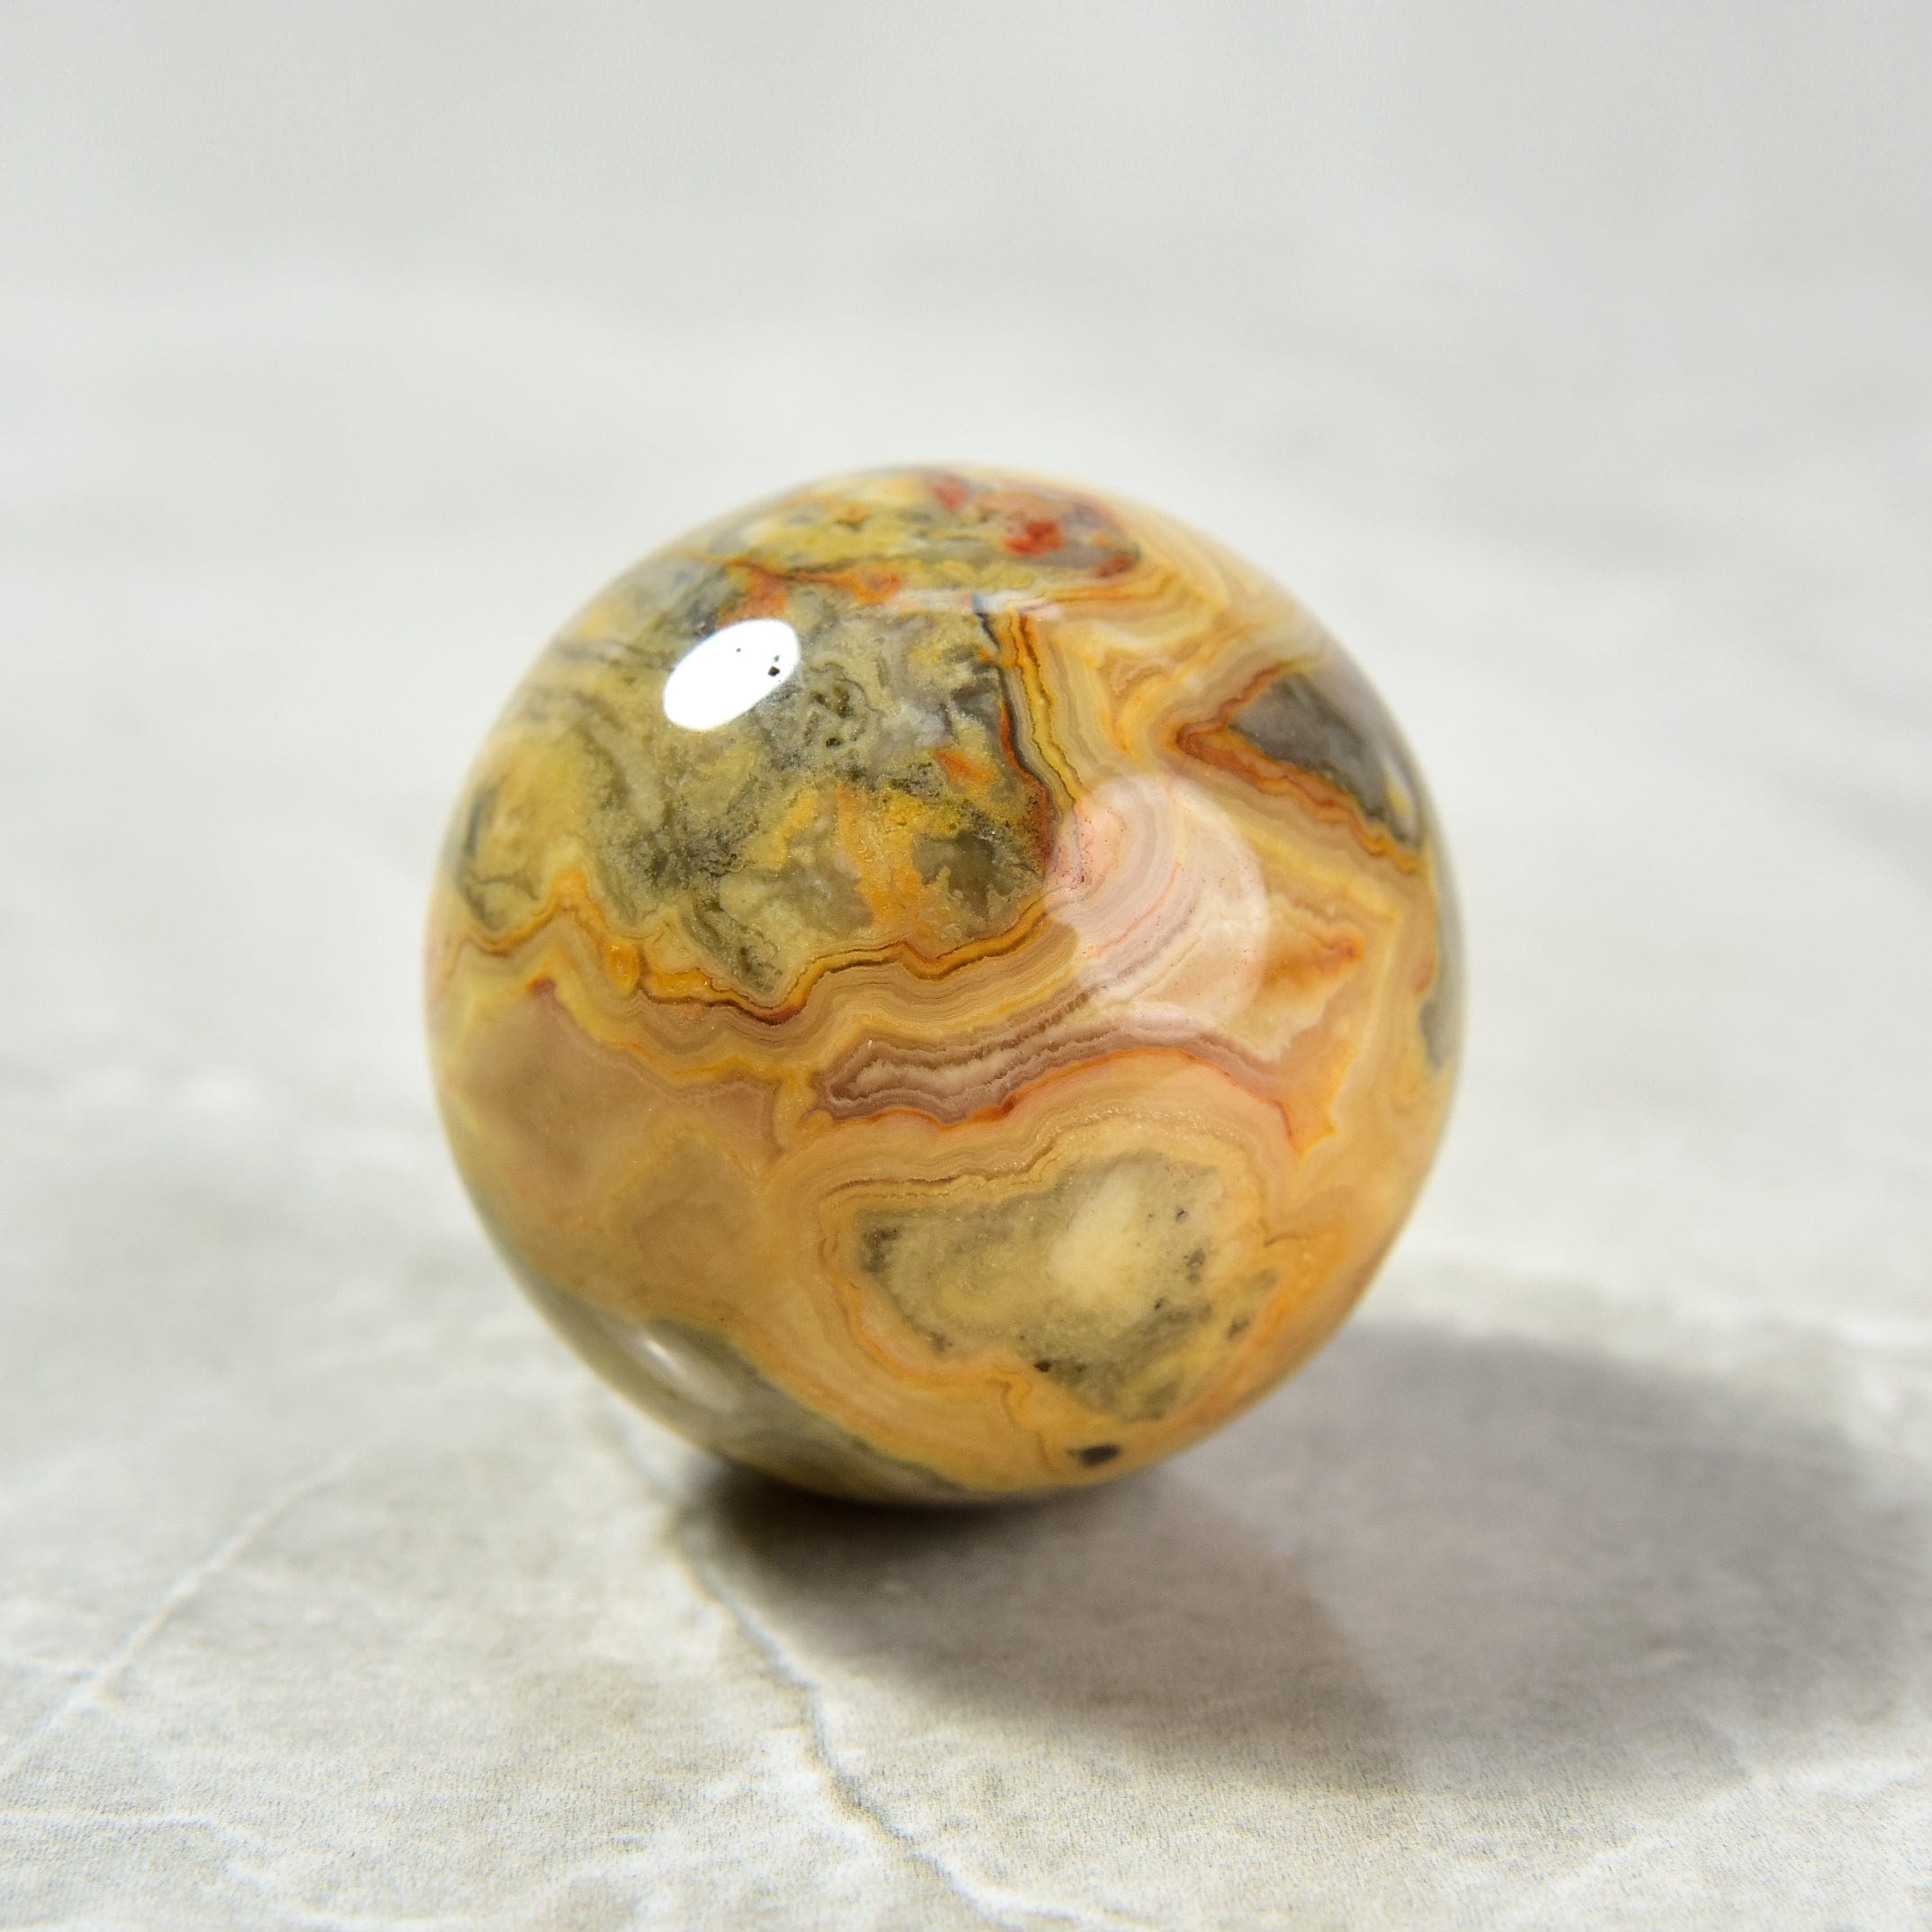 KALIFANO Gemstone Carvings 1.6" Crazy Lace Agate Sphere Natural Gemstone Carving CV15-SP-CLA